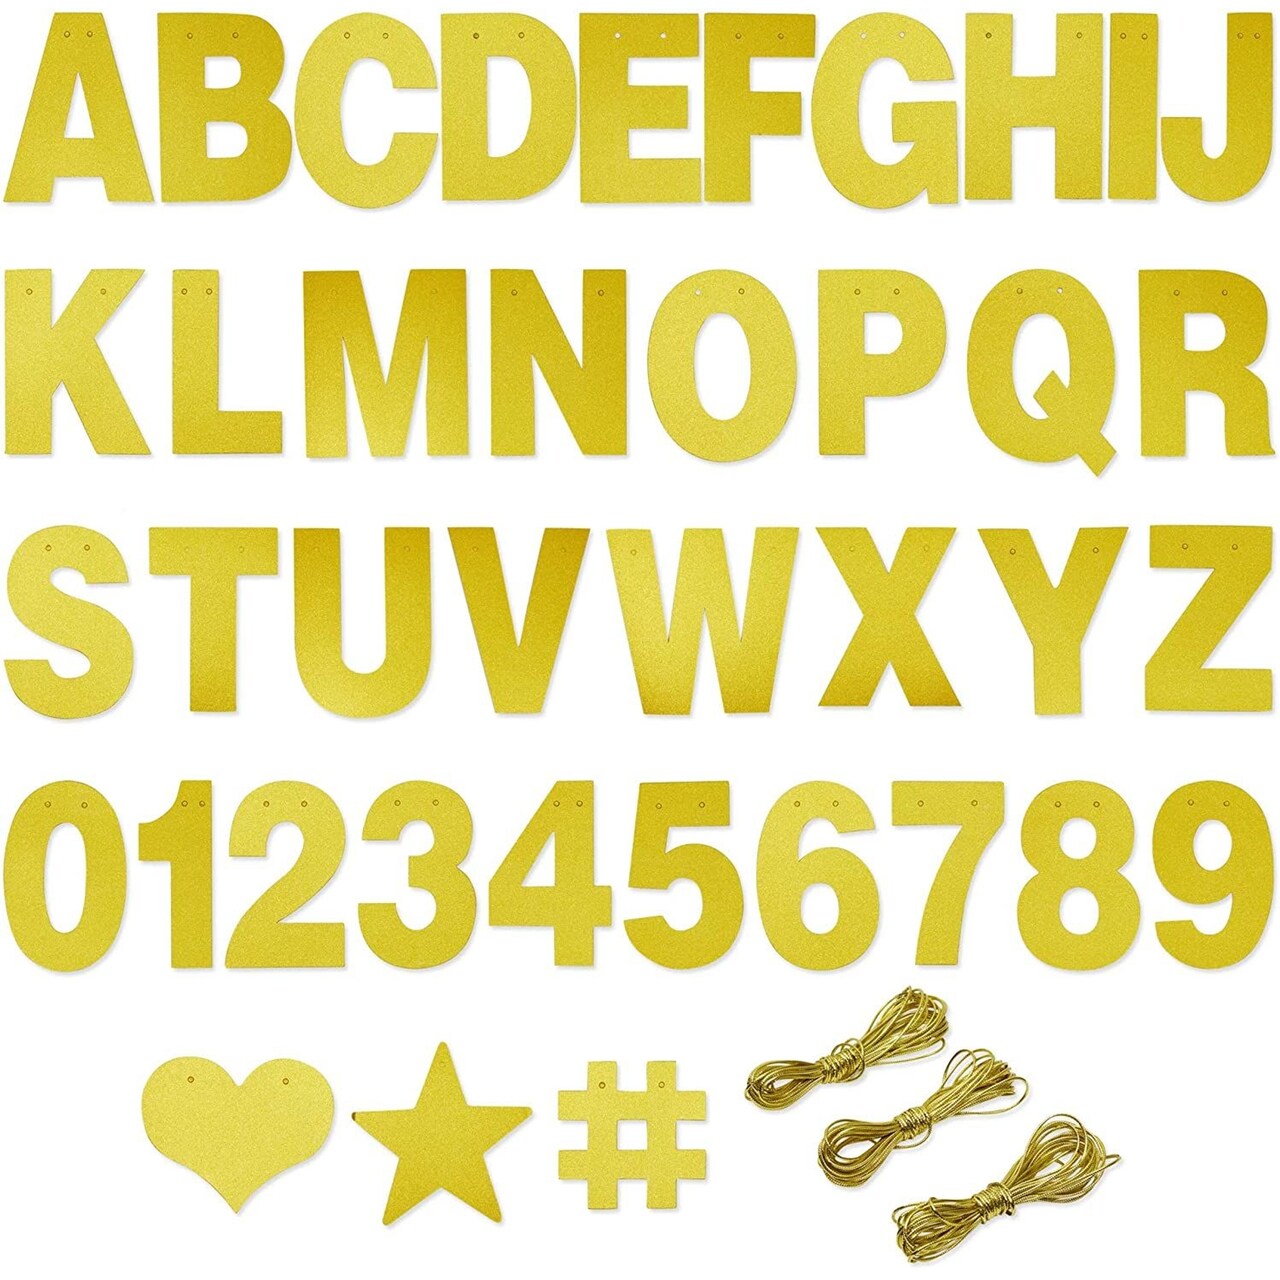 130 Piece DIY Gold Glitter Make Your Own Banner Kit with Letters, Numbers,  and Symbols (5 Inch Letters)